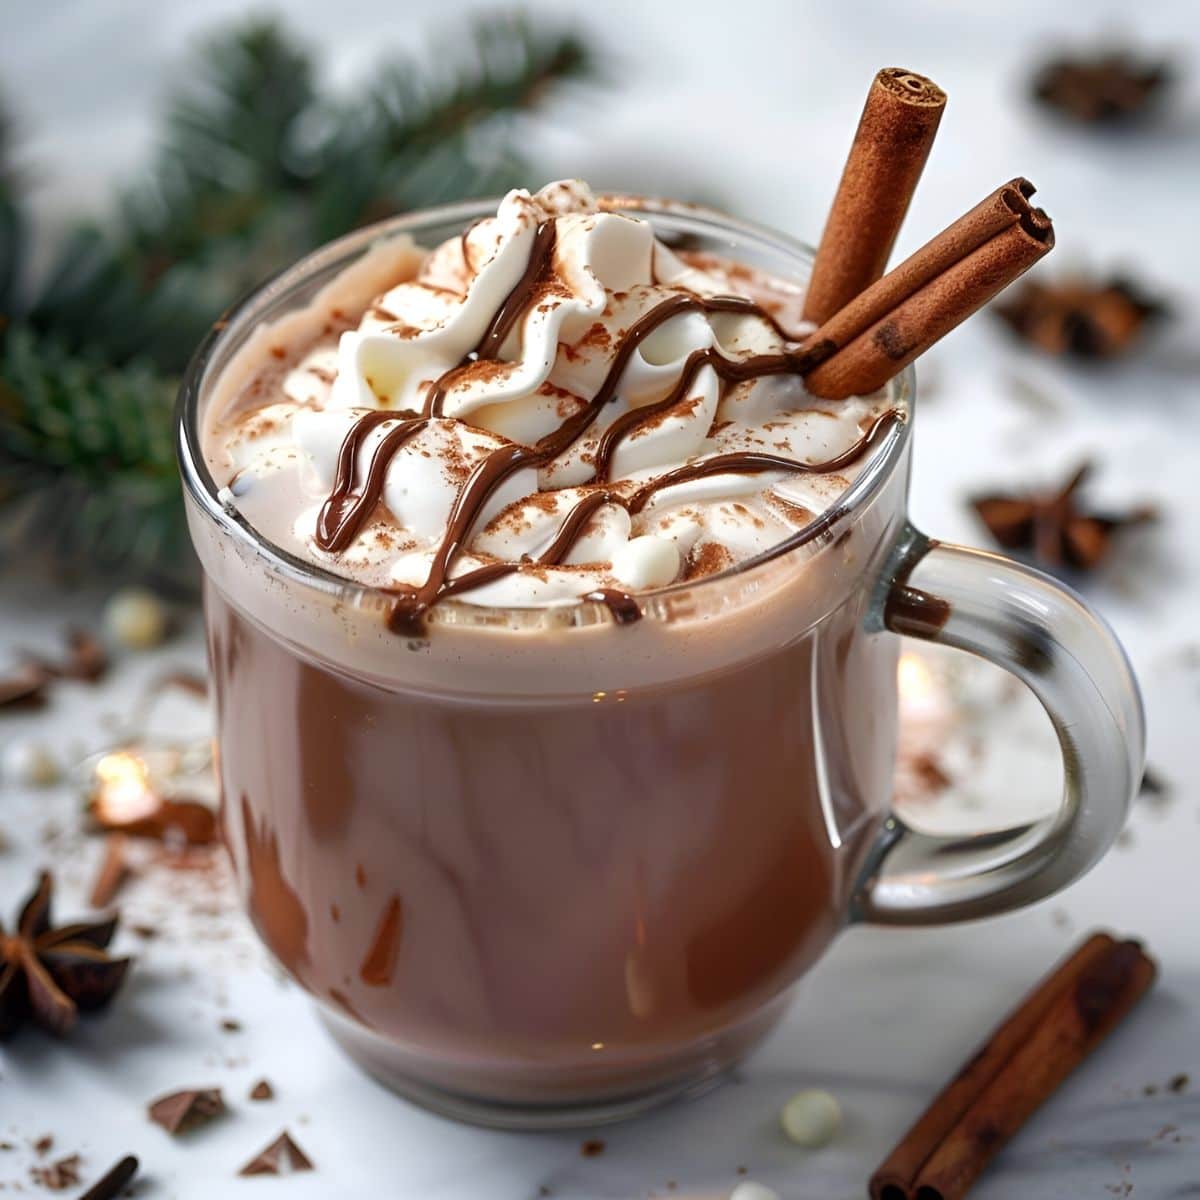 Glass Mug of Bailey's Hot Cocoa with Whipped Cream, Cocoa Powder, A Drizzle of Chocolate Syrup, and Cinnamon Sticks for Garnish with Cinnamon Sticks, Star Anise, and Pine Boughs in the Background